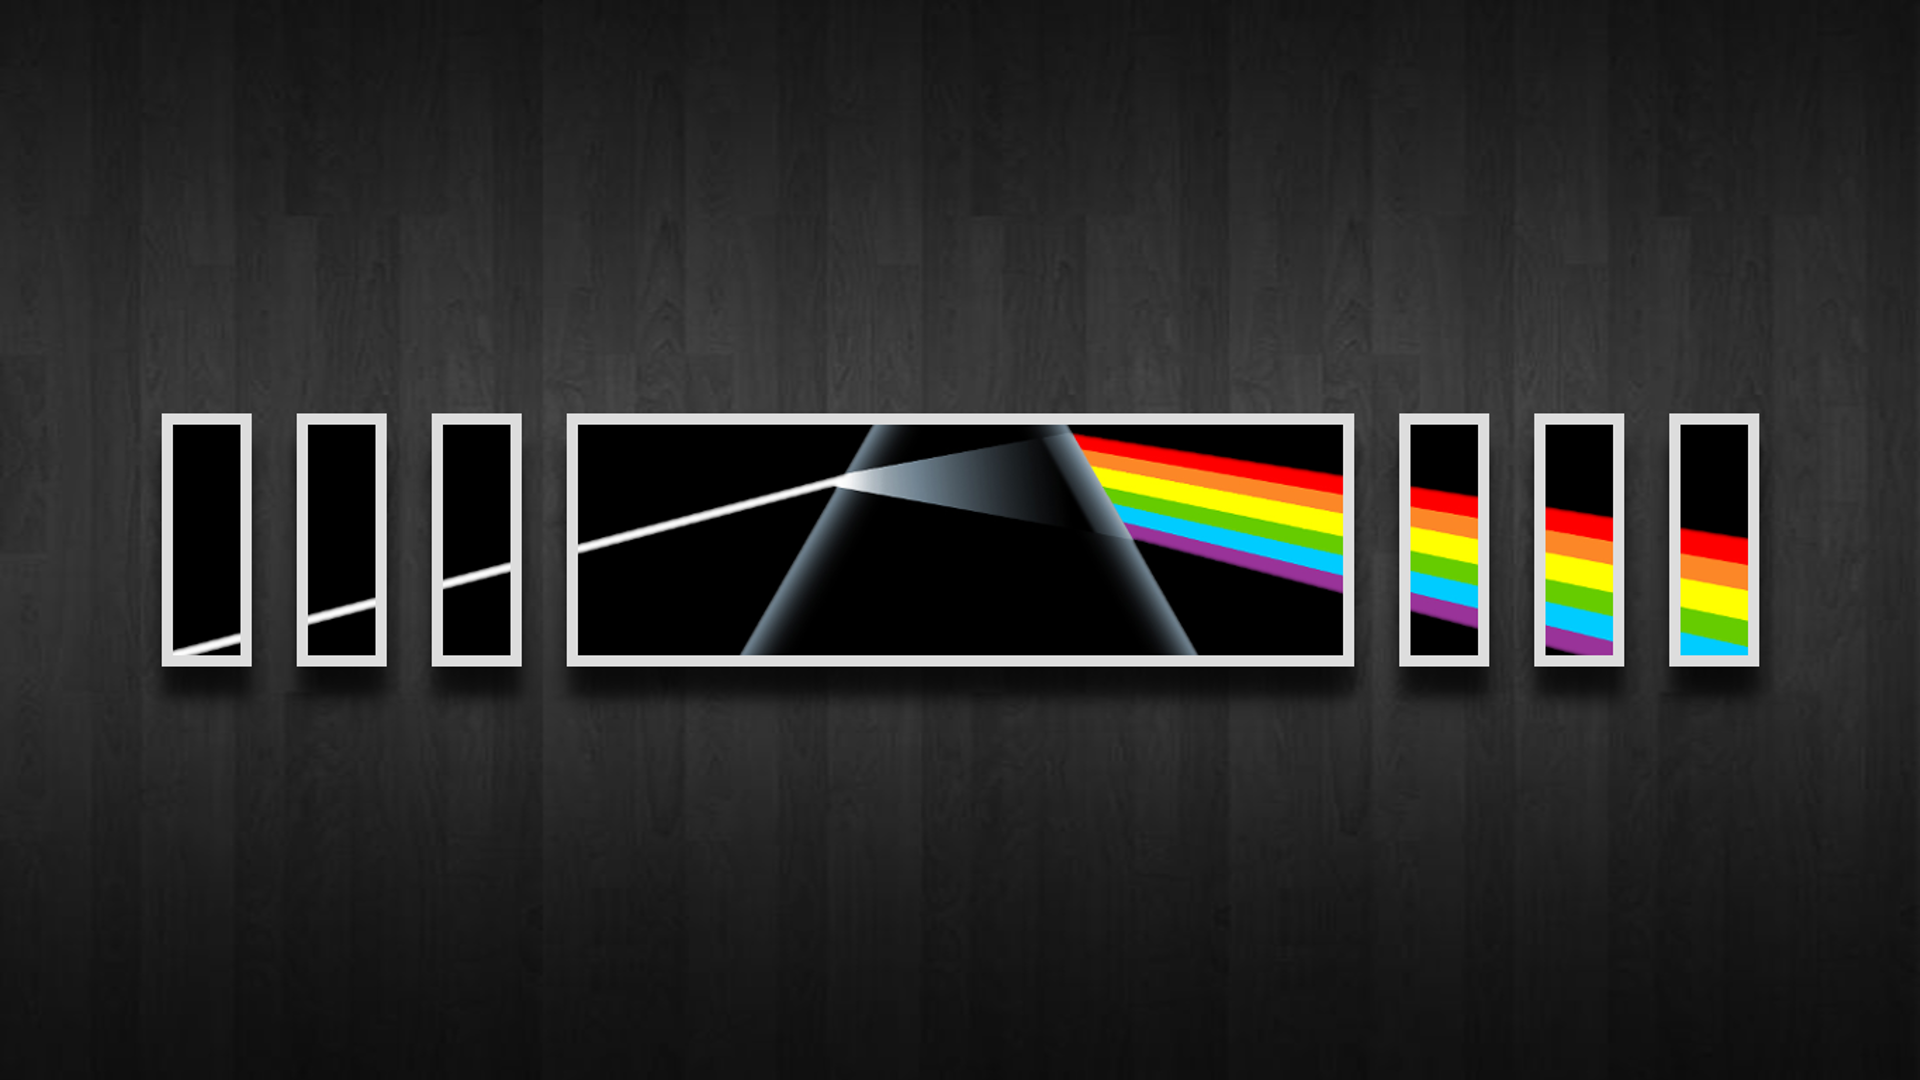 General 1920x1080 Pink Floyd album covers abstract collage